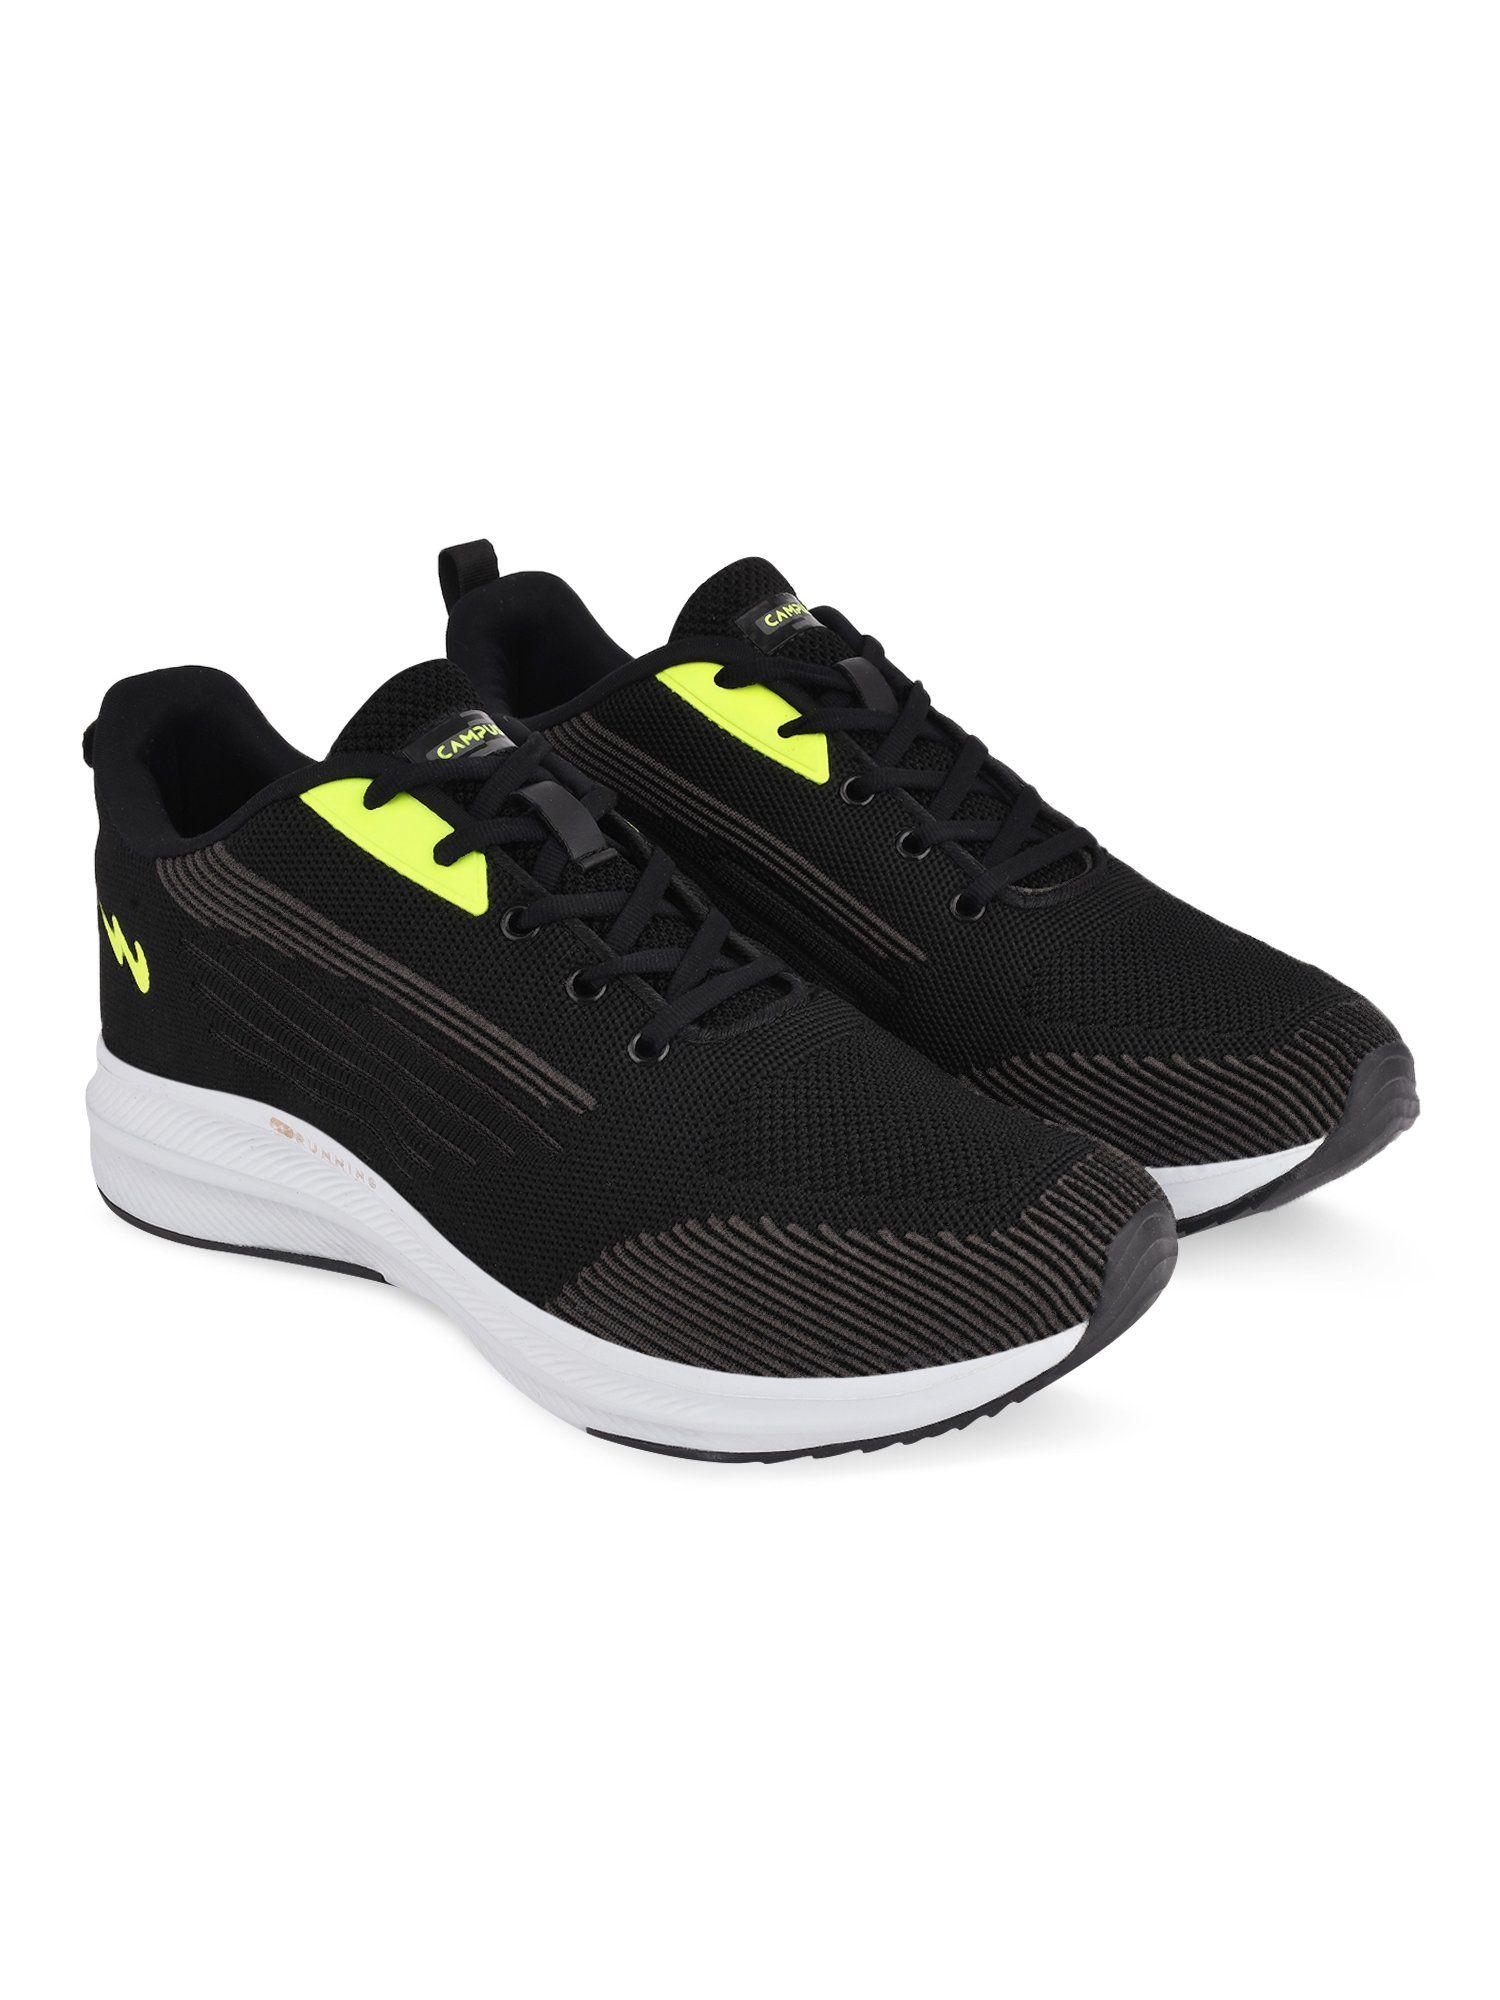 camp marcus black mens running shoes